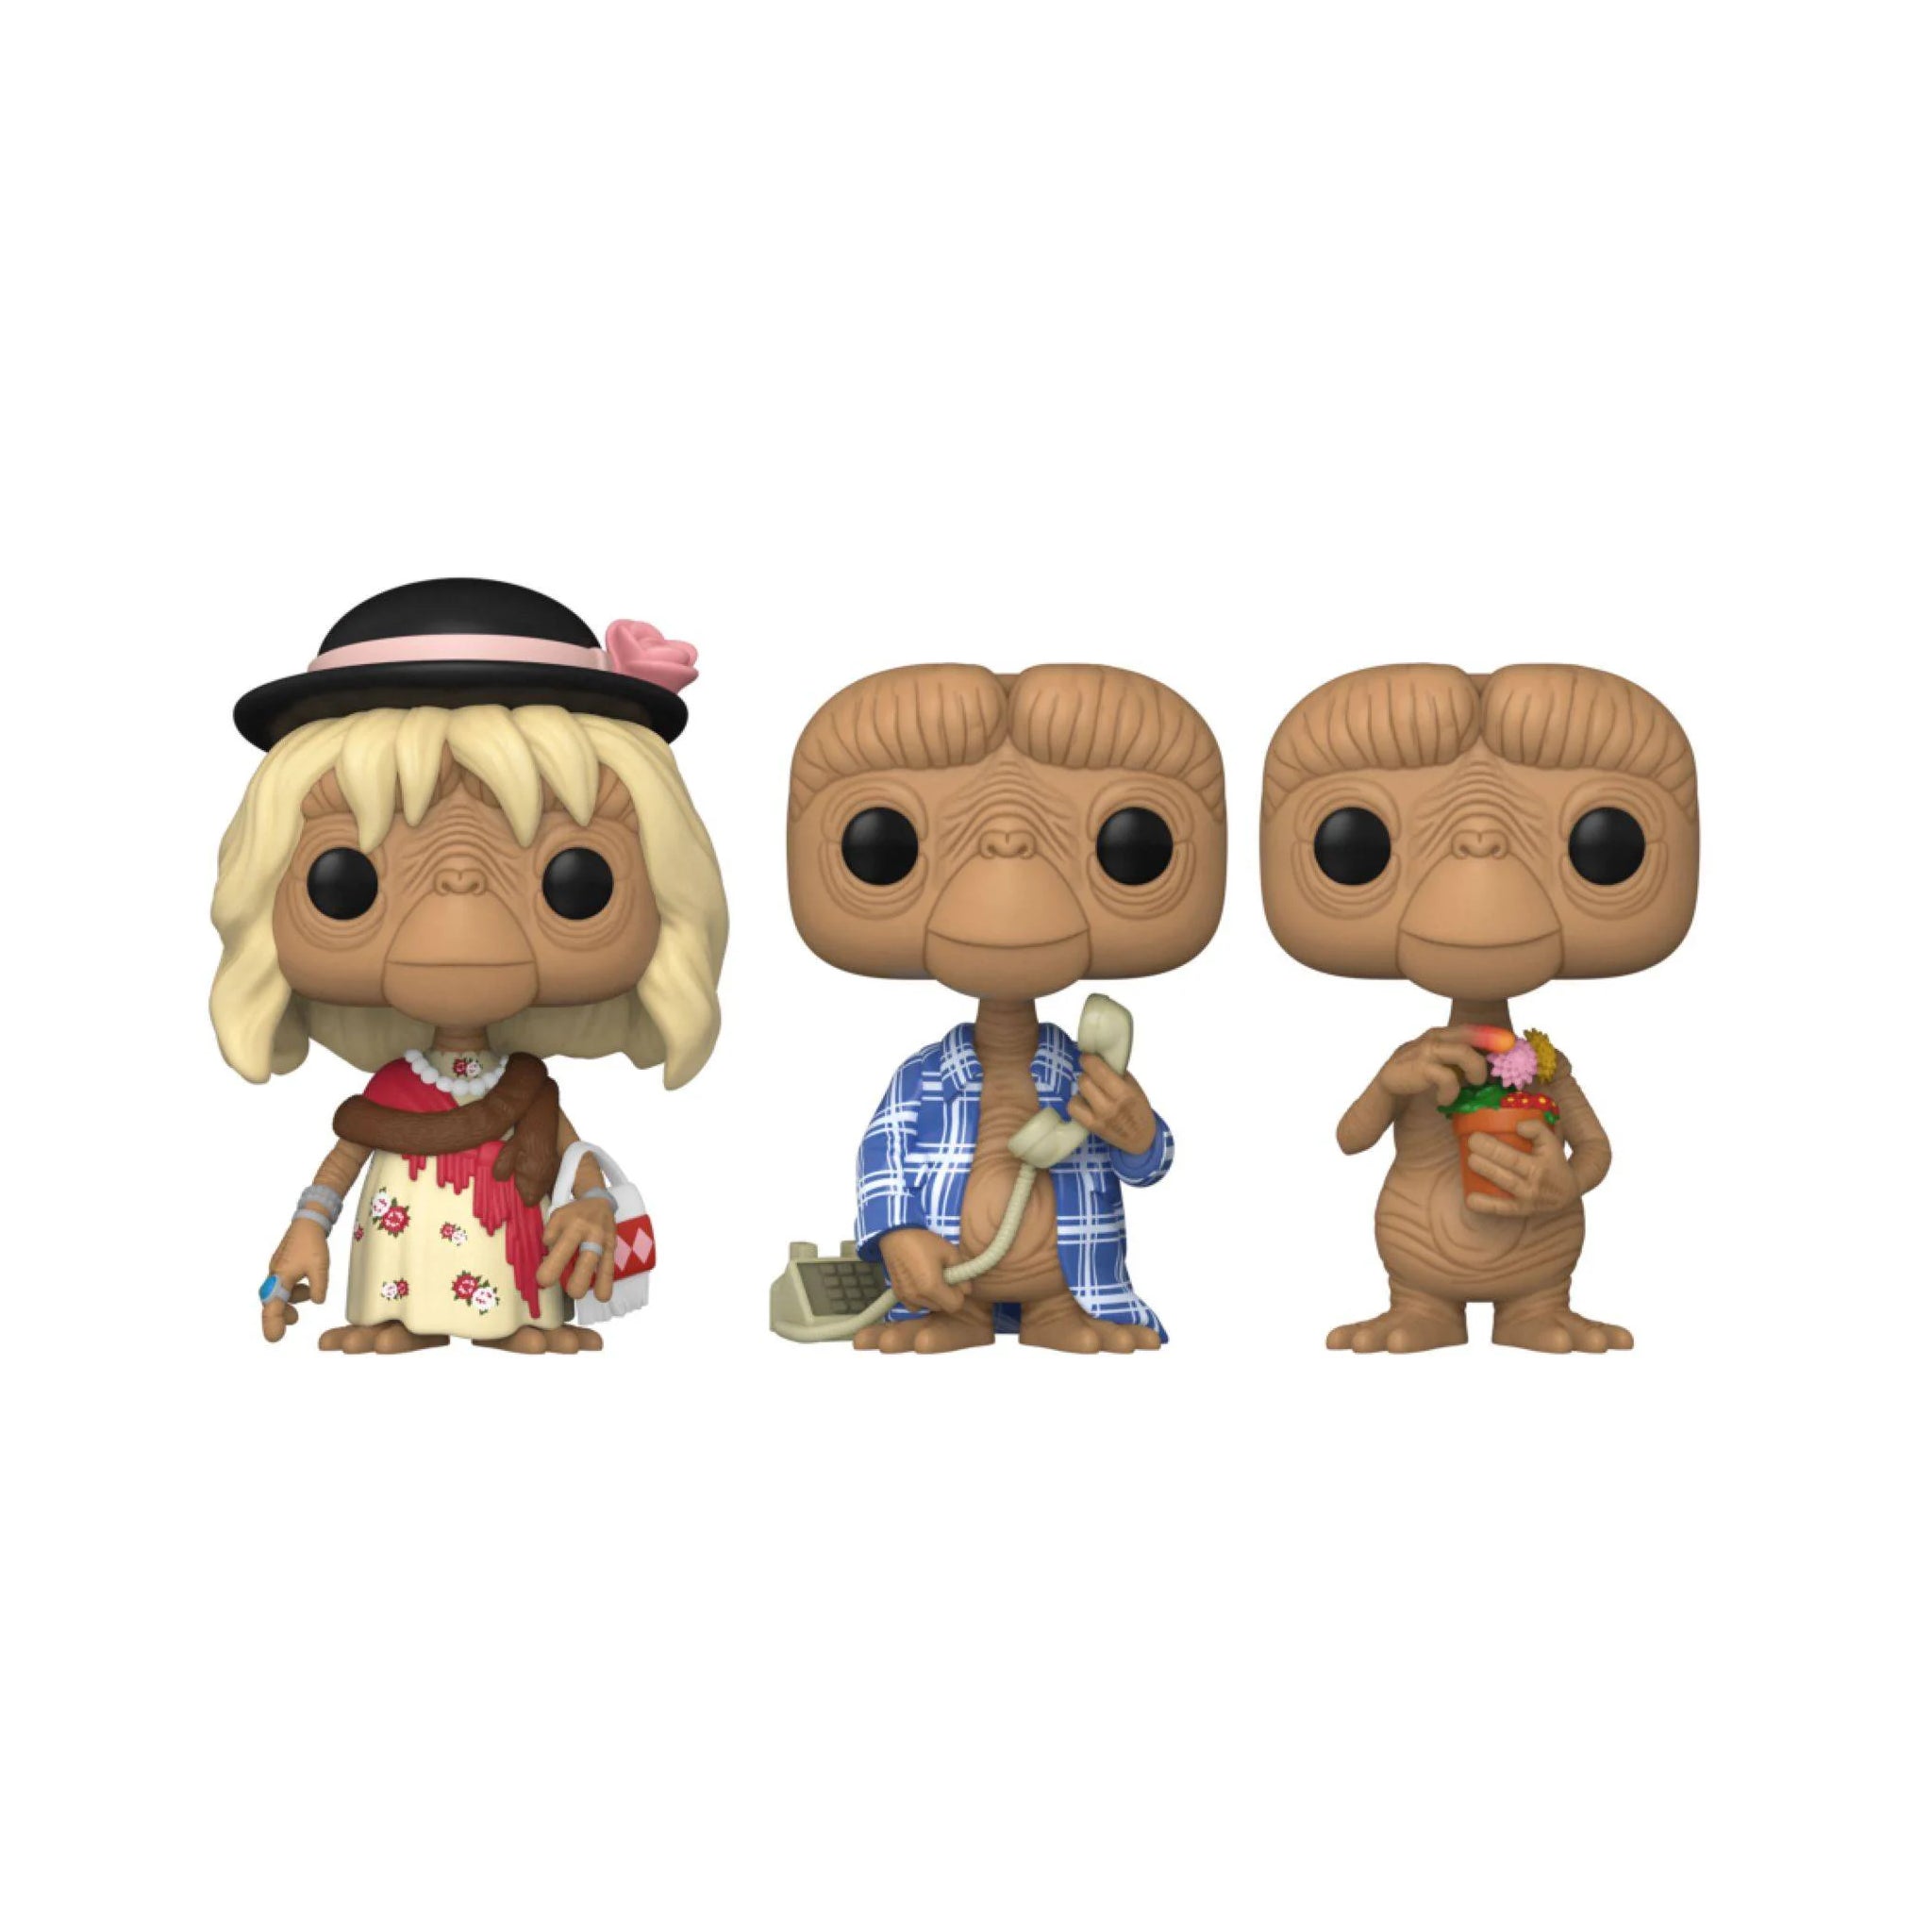 E.T. in Disguise / E.T. in Robe / E.T. with Flowers Funko Pop! WALMART EXCLUSIVE